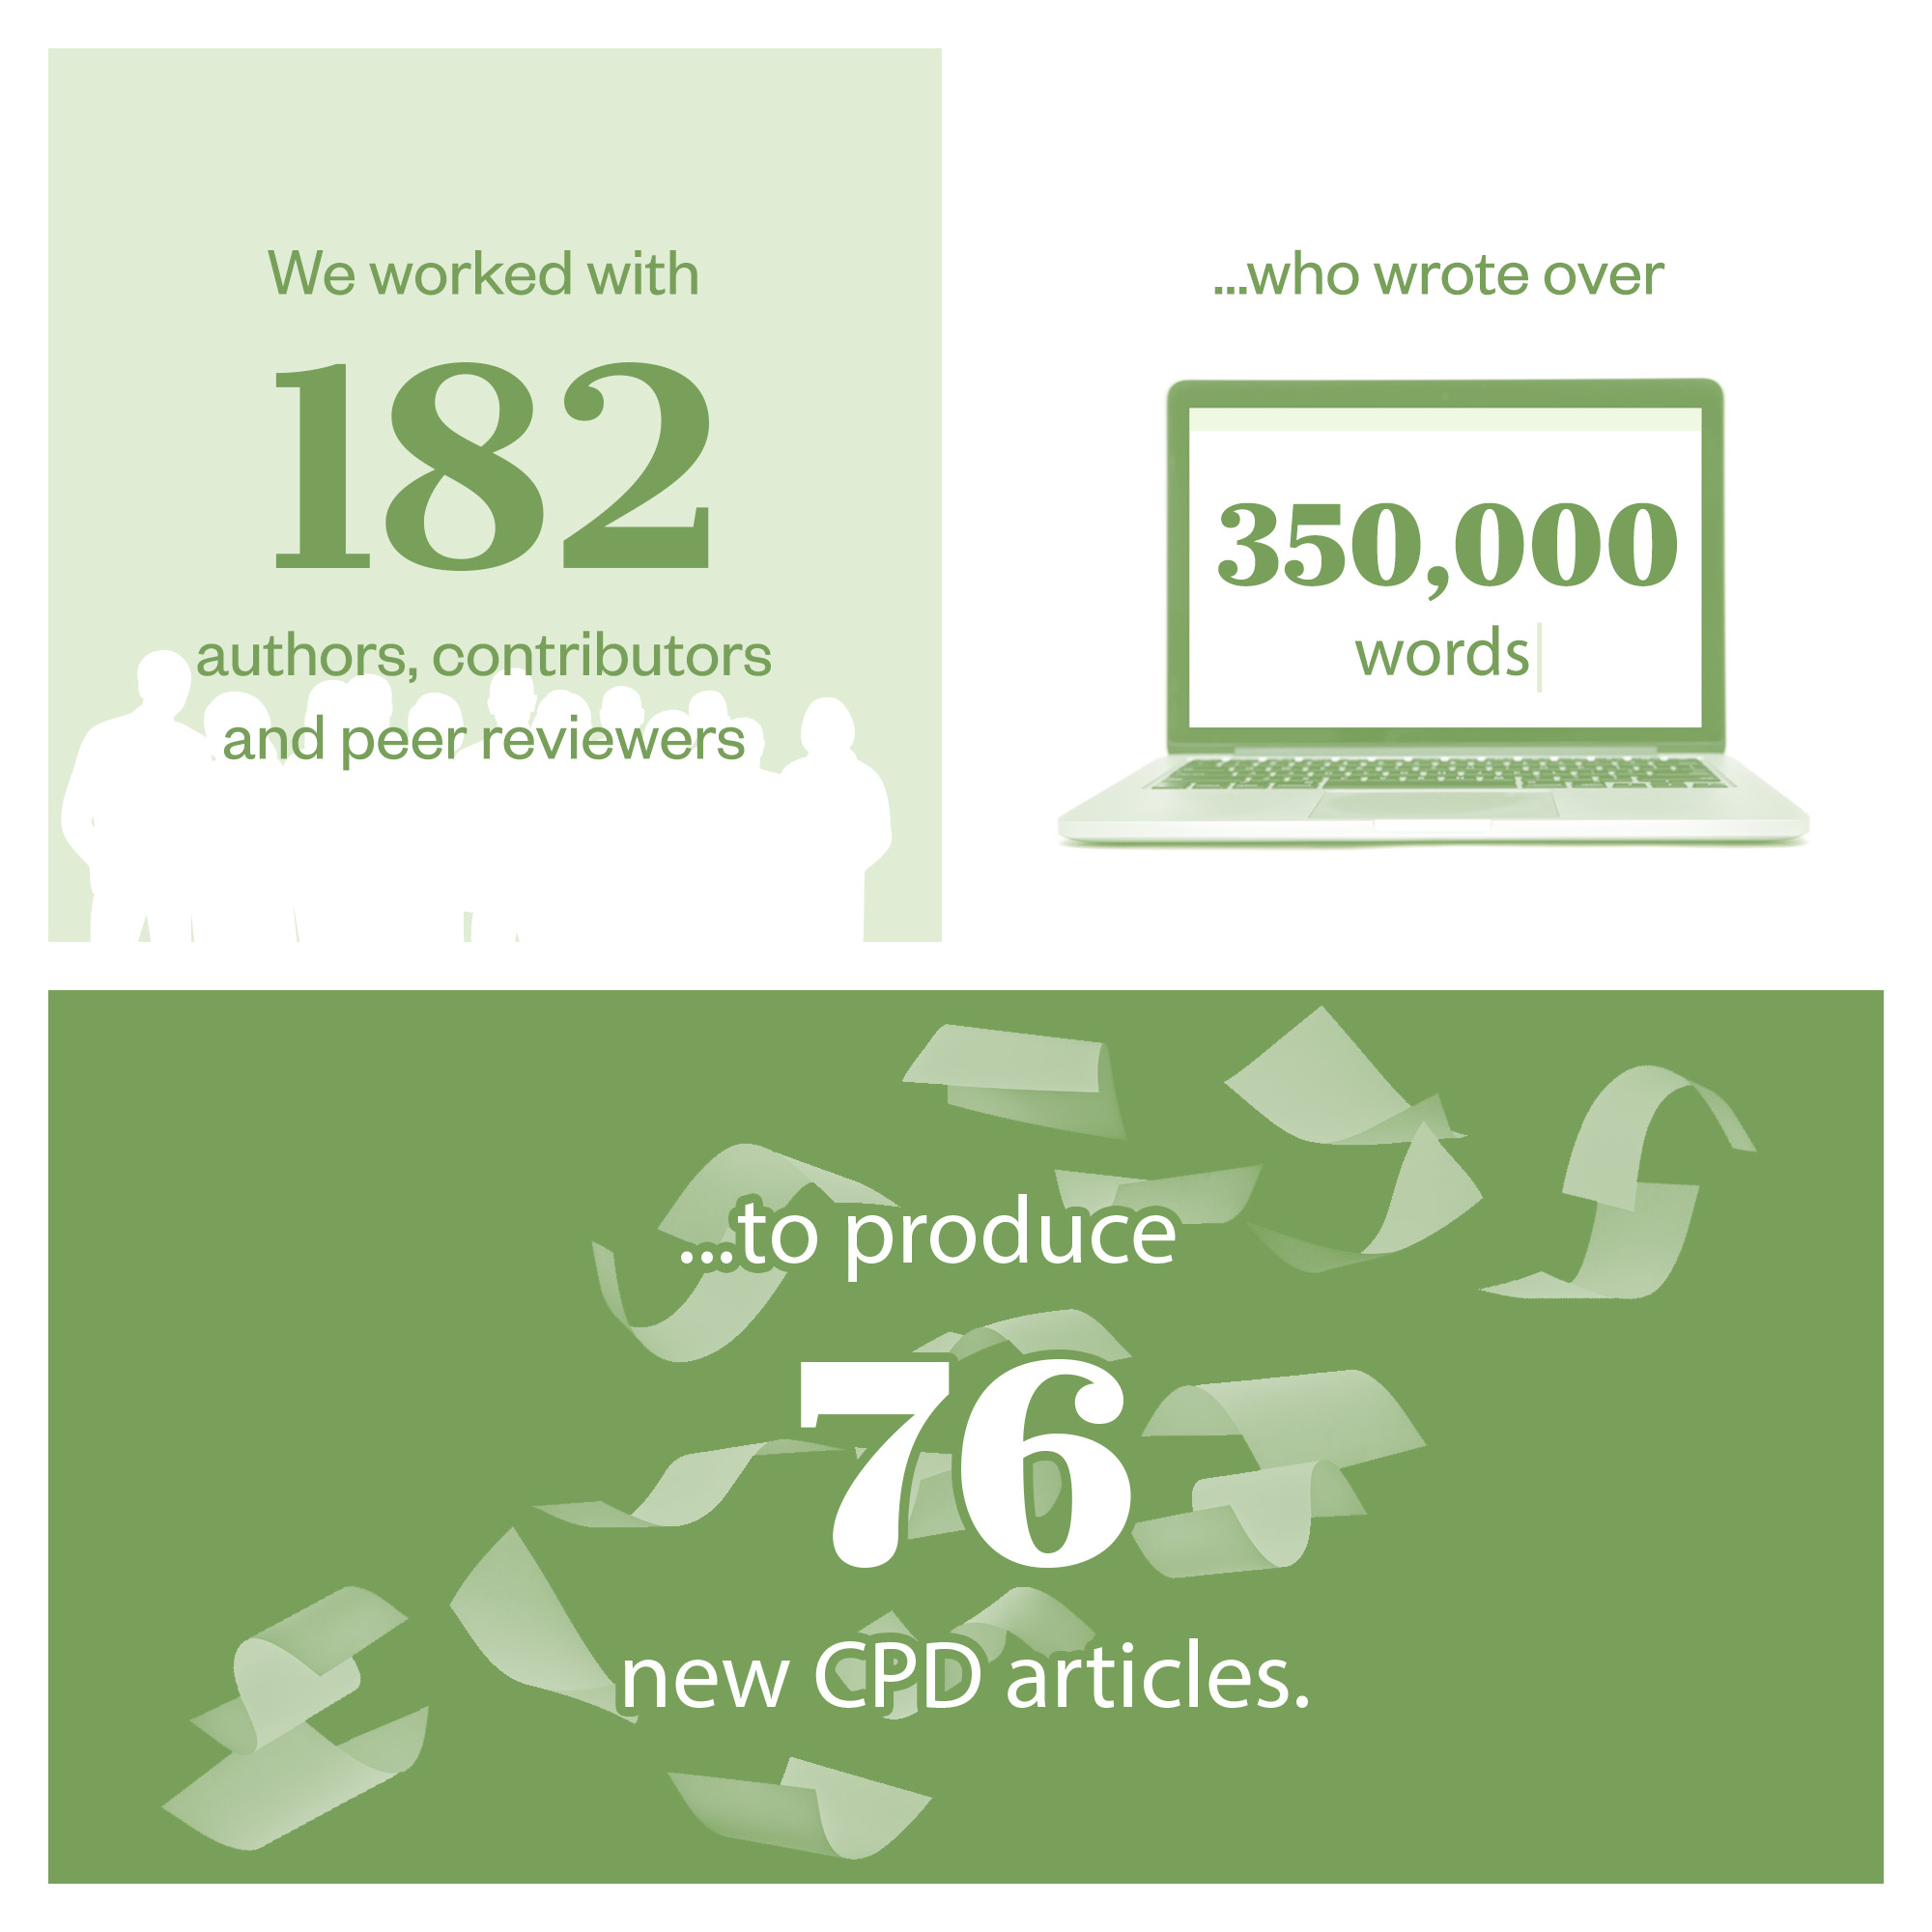 Stats graphic saying "we worked with 182 authors, contributors and reviewers who wrote over 350,000 words to produce 76 new CPD articles"